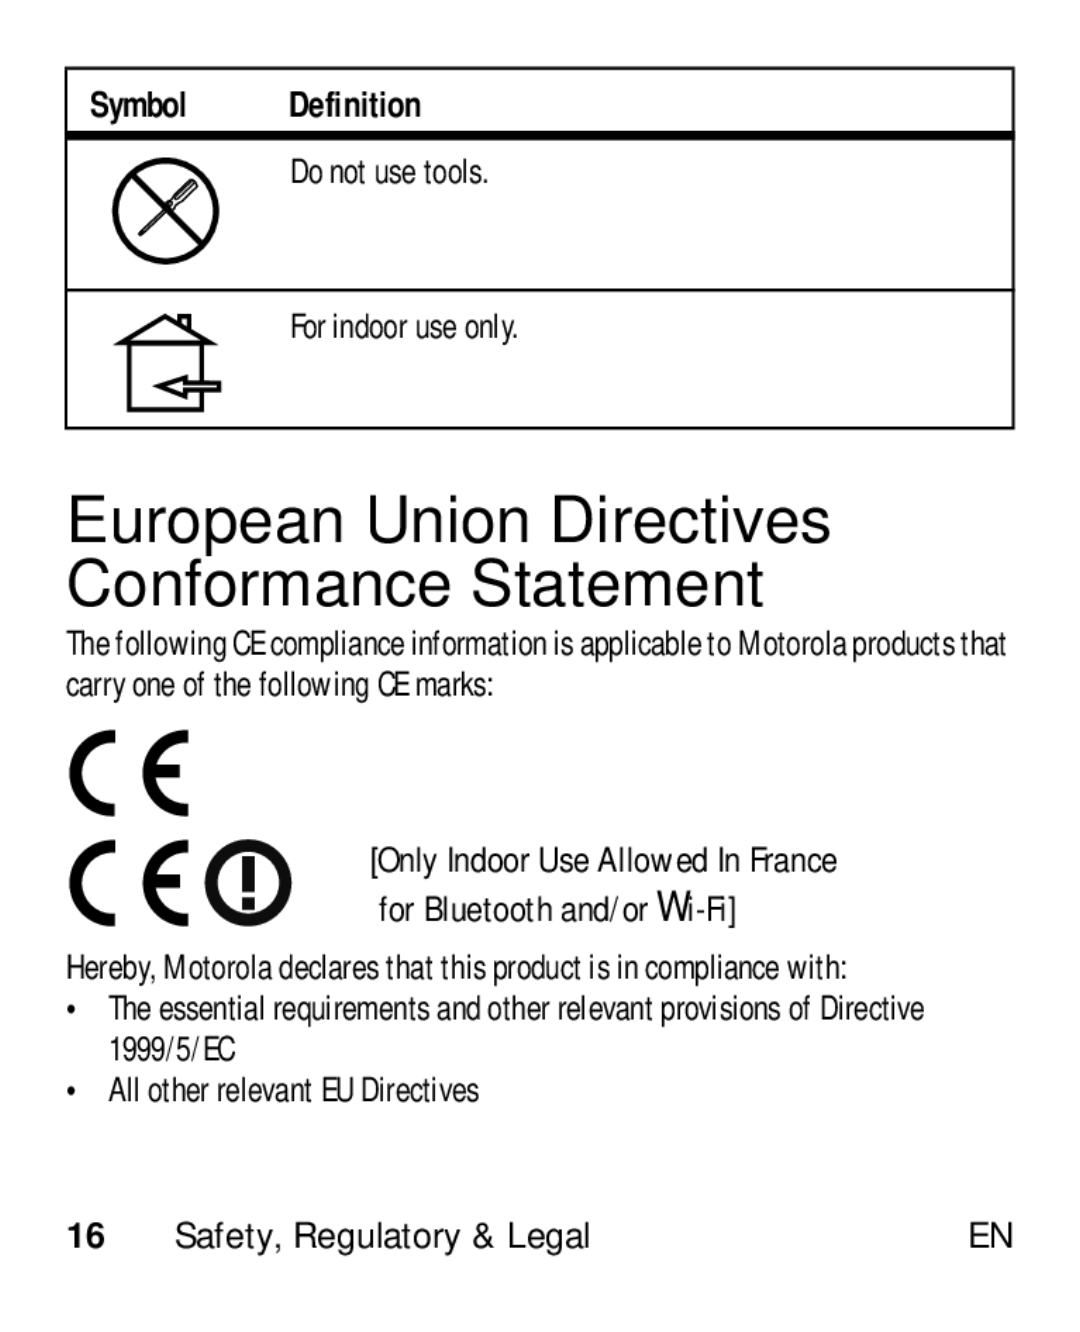 Motorola HK110 manual European Union Directives Conformance Statement, Do not use tools For indoor use only 